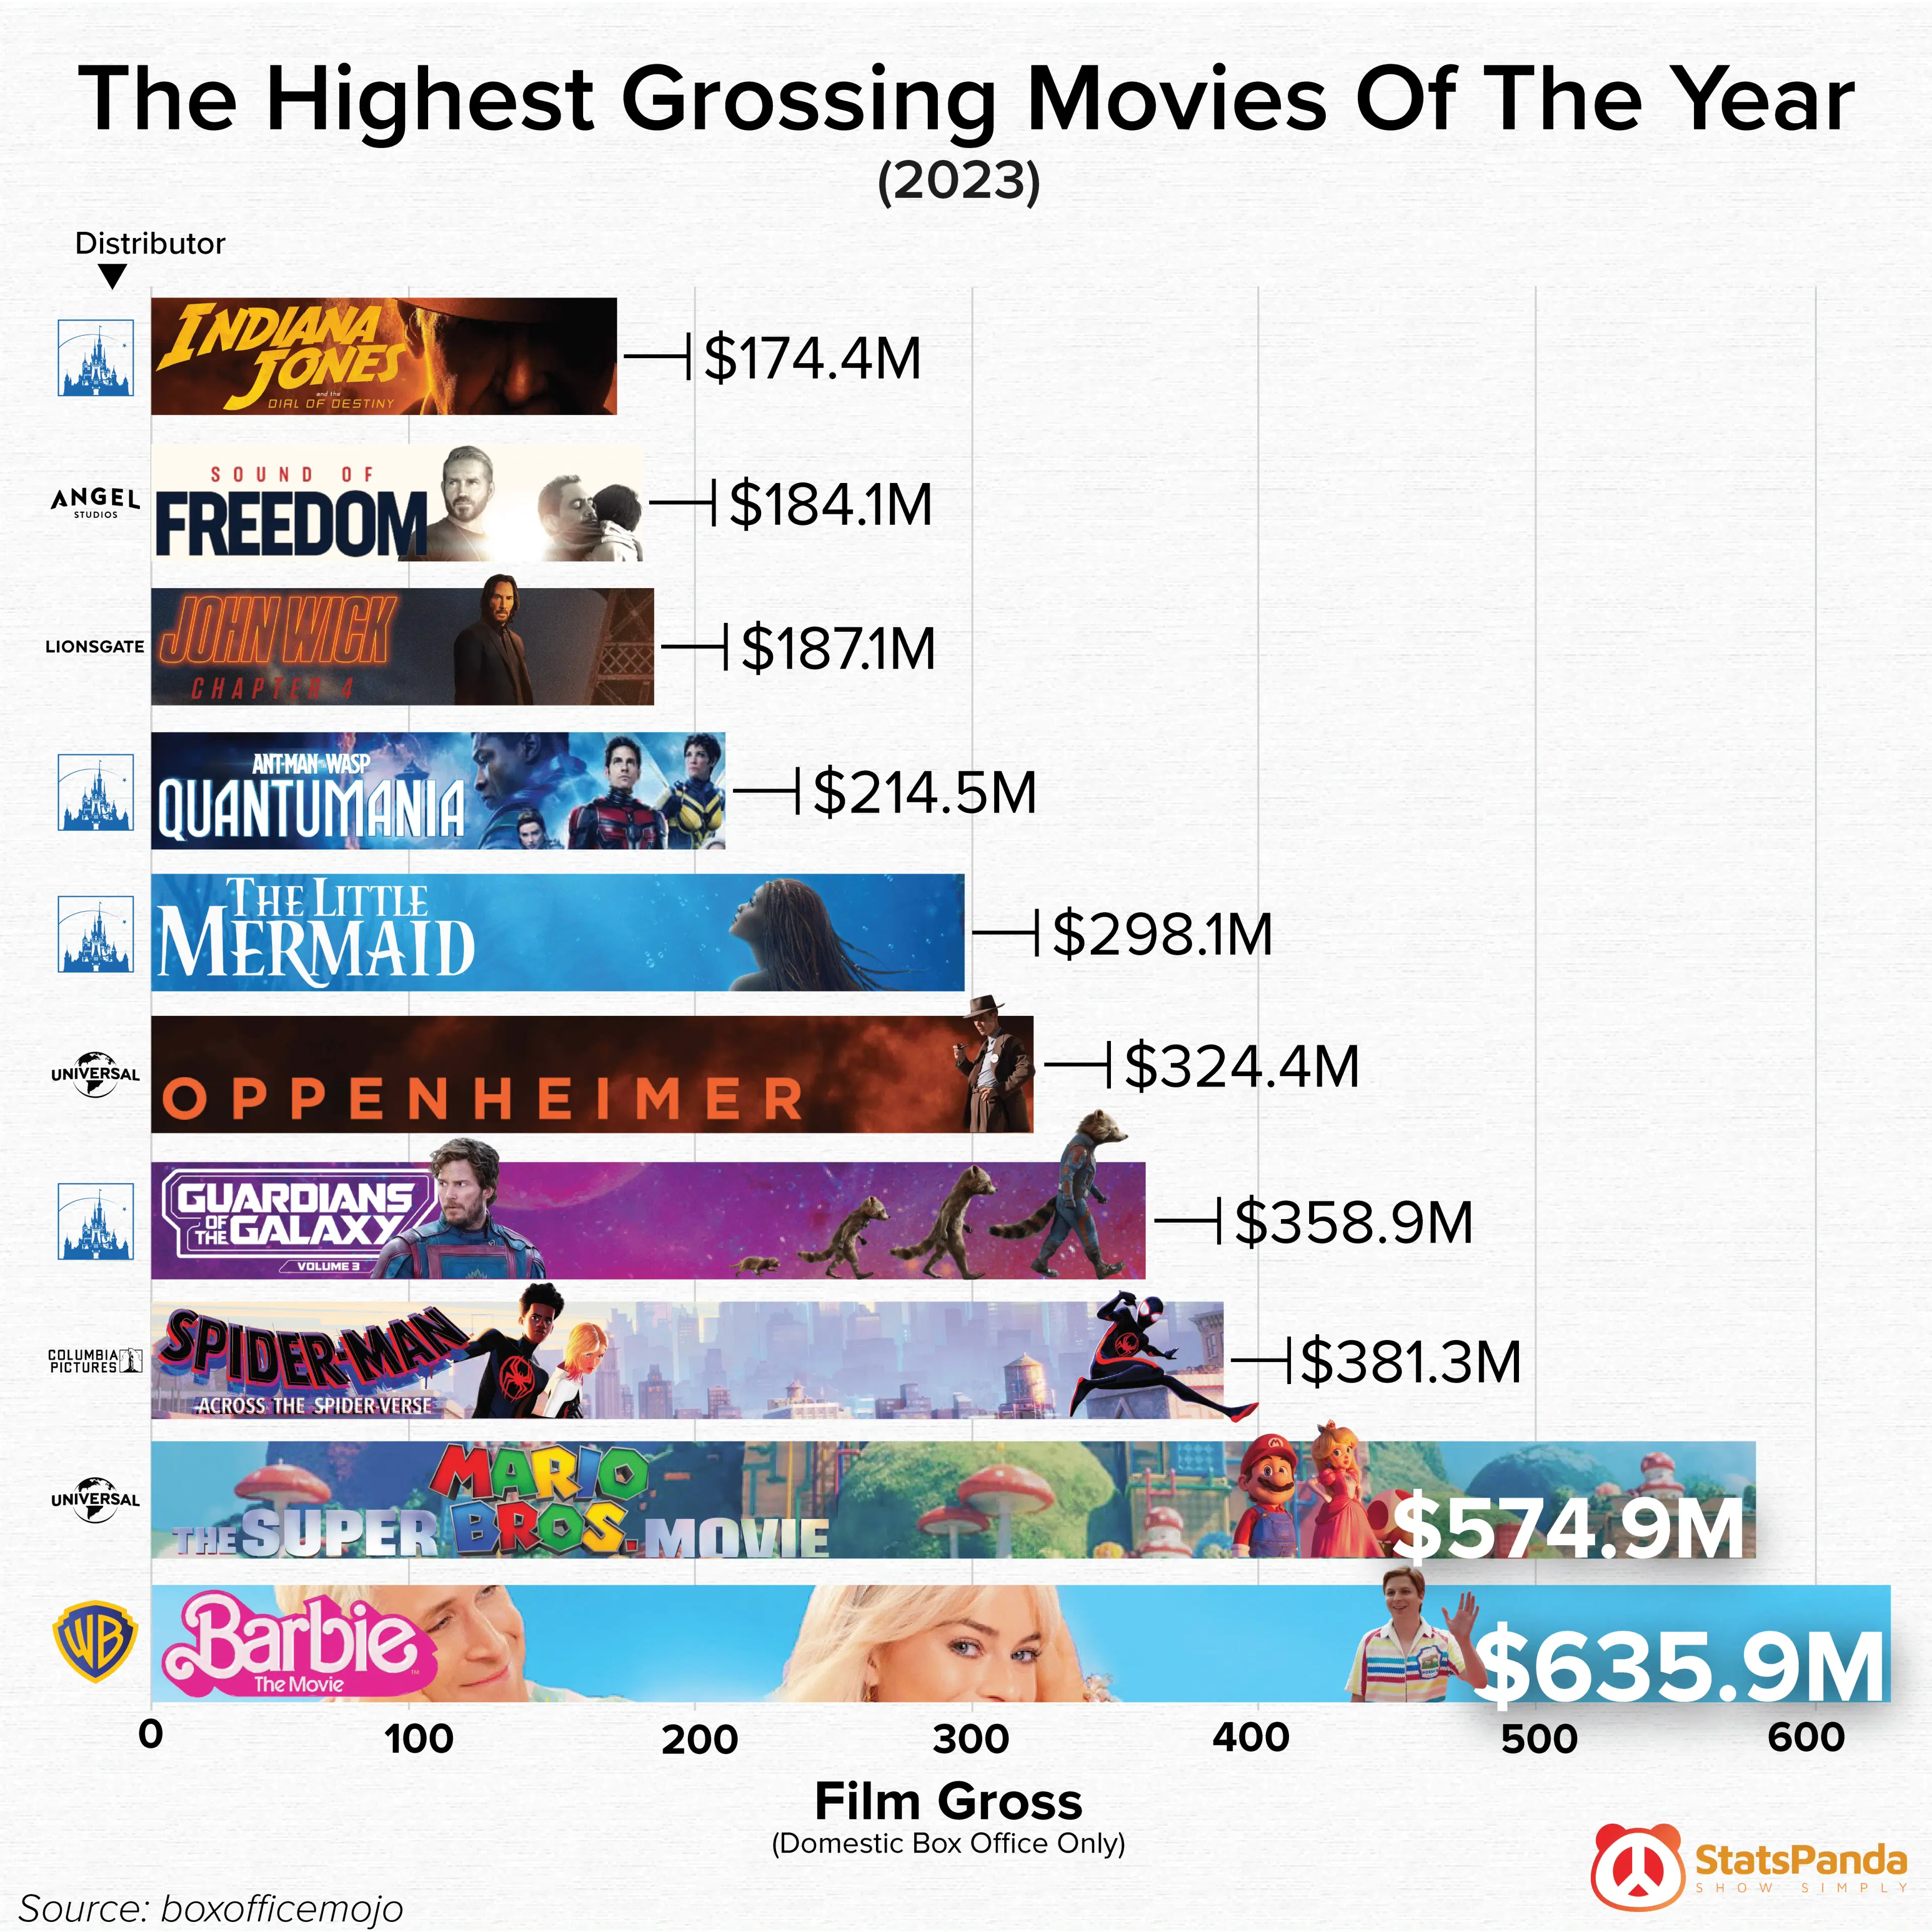 The Highest Grossing Movies Of The Year